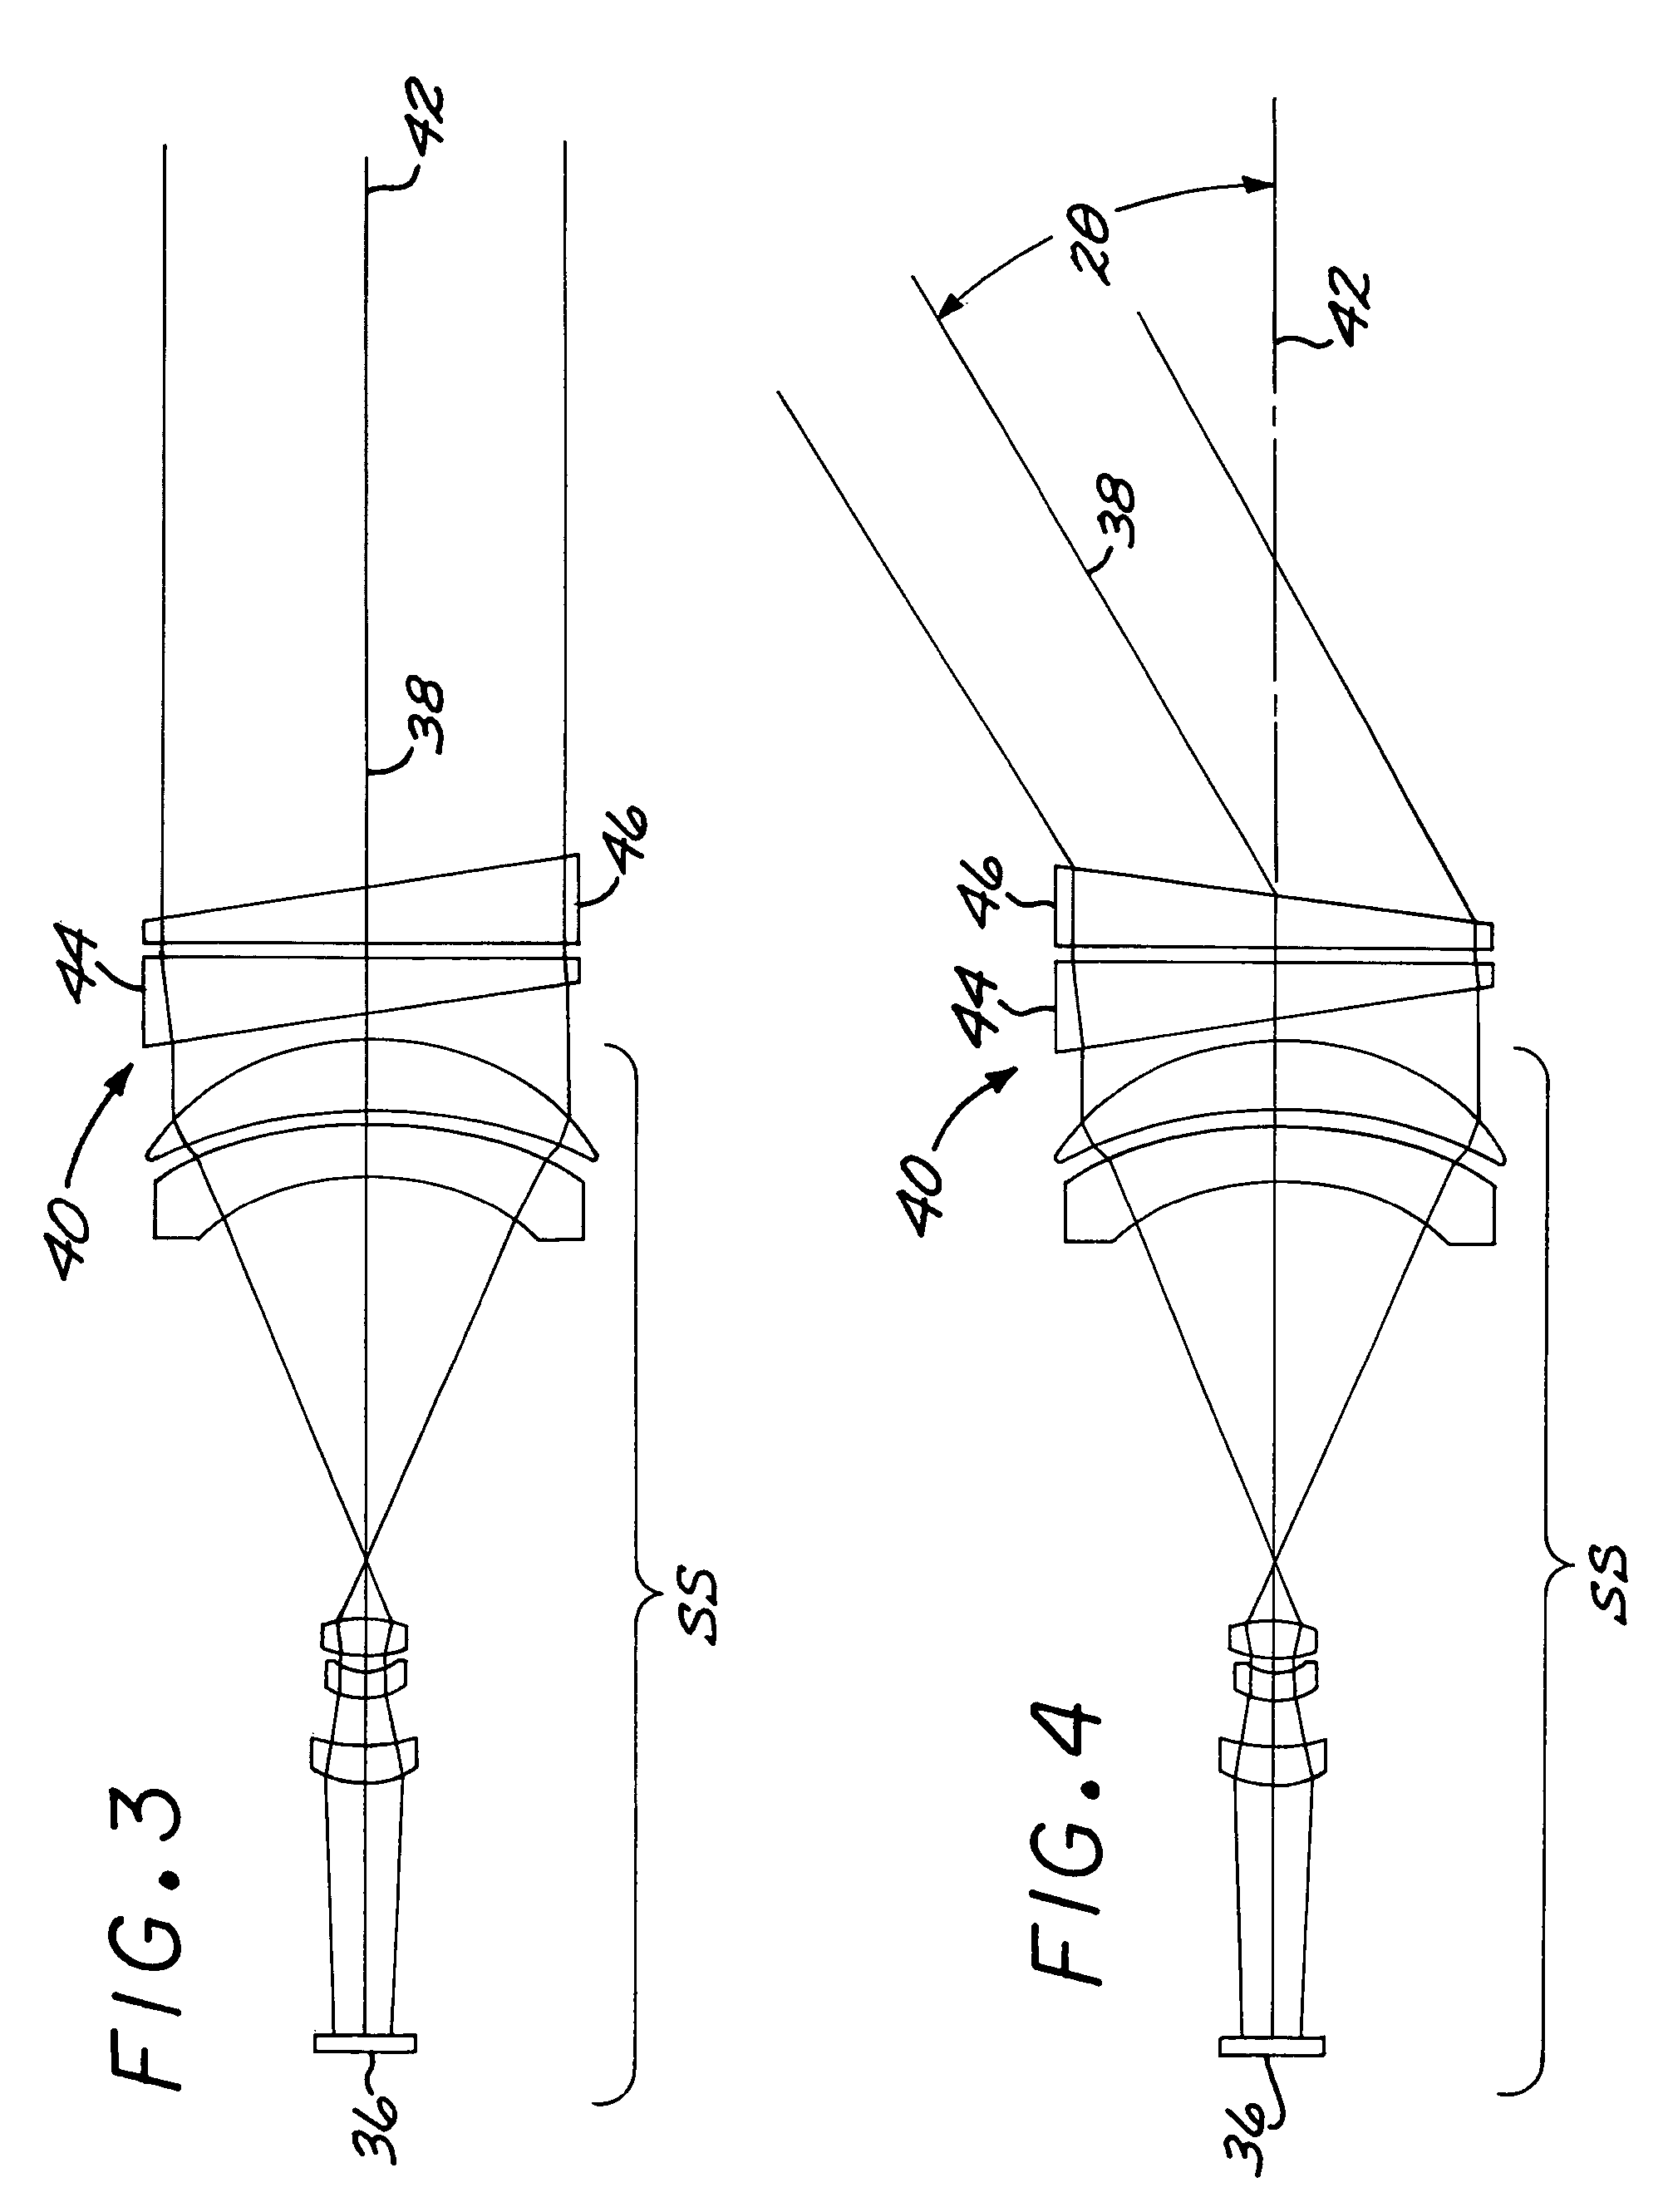 Optical device with a steerable light path